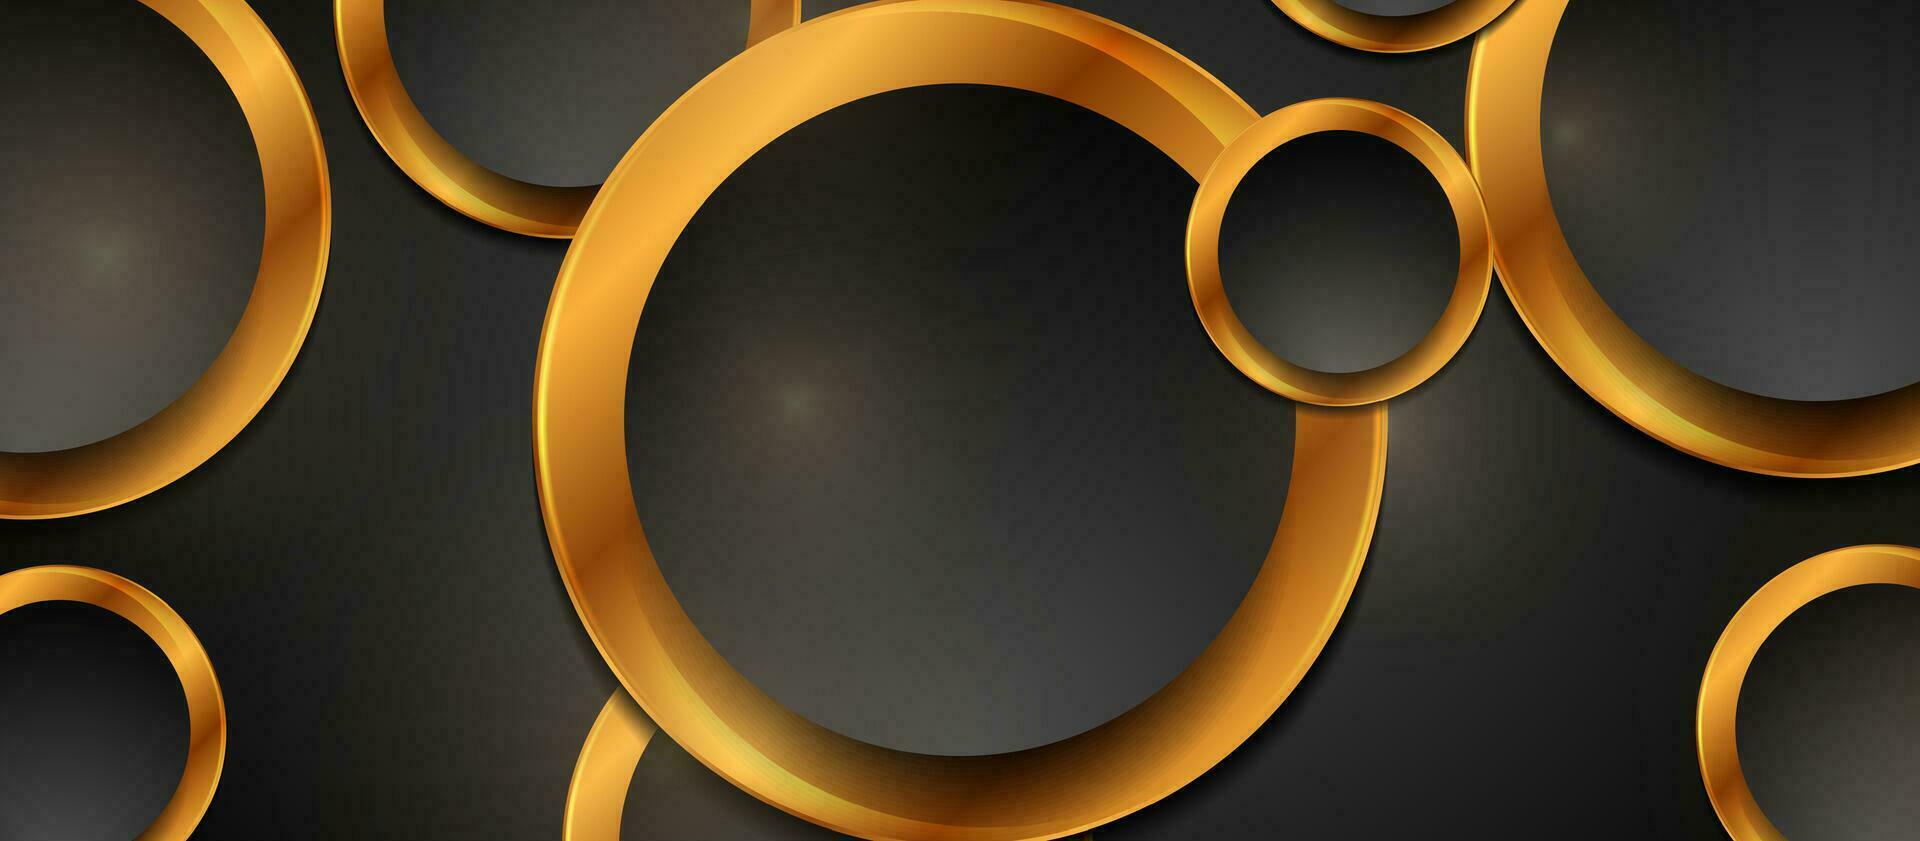 Black and shiny golden circles abstract tech geometric banner vector